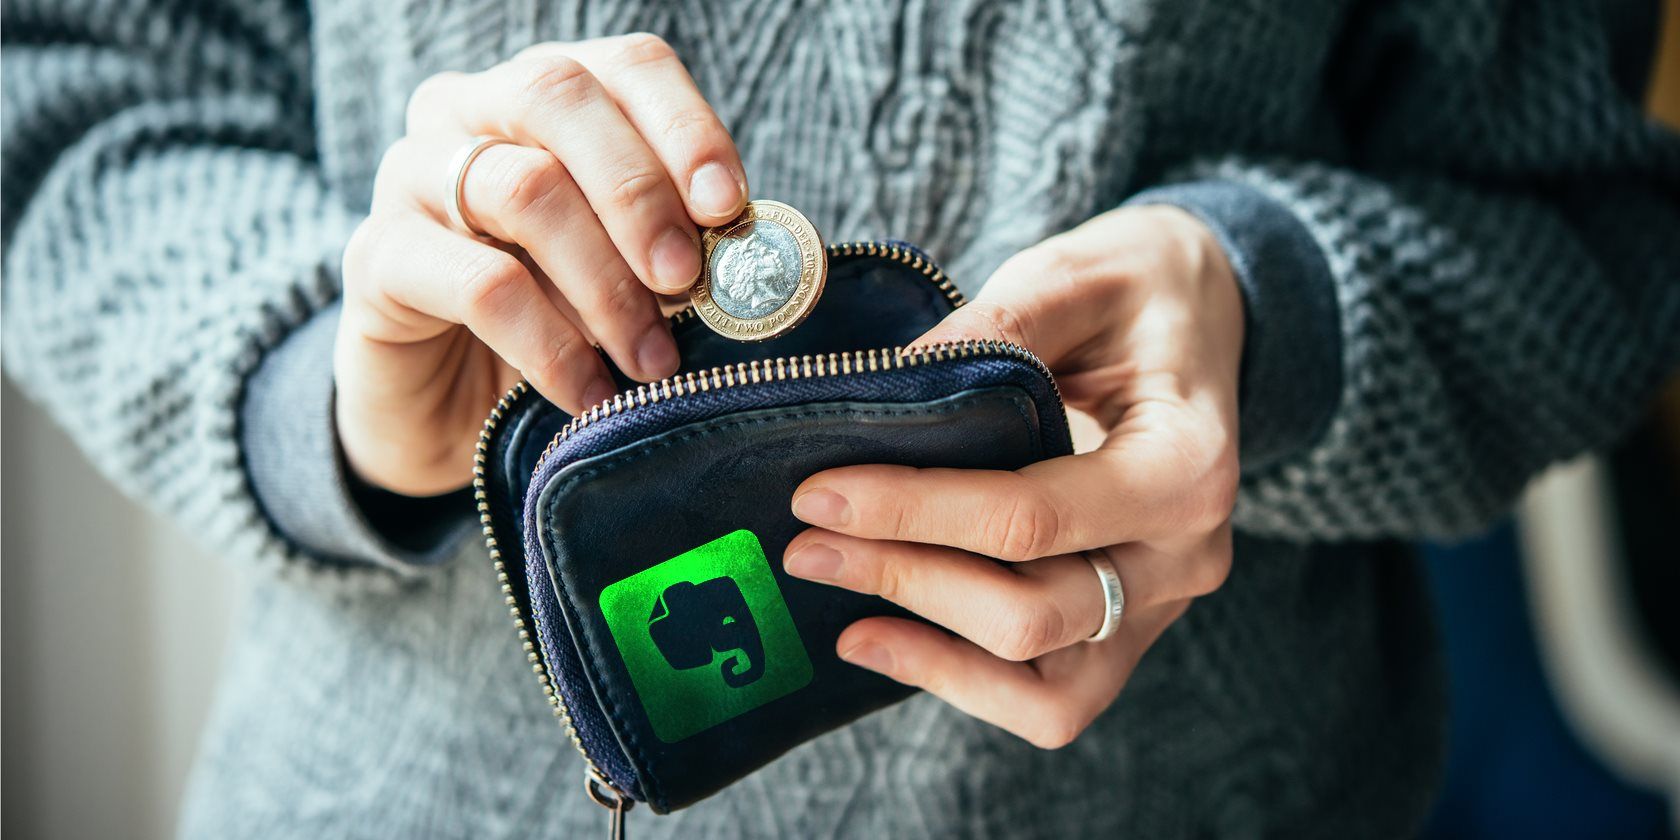 Person pulling money out of an Evernote purse